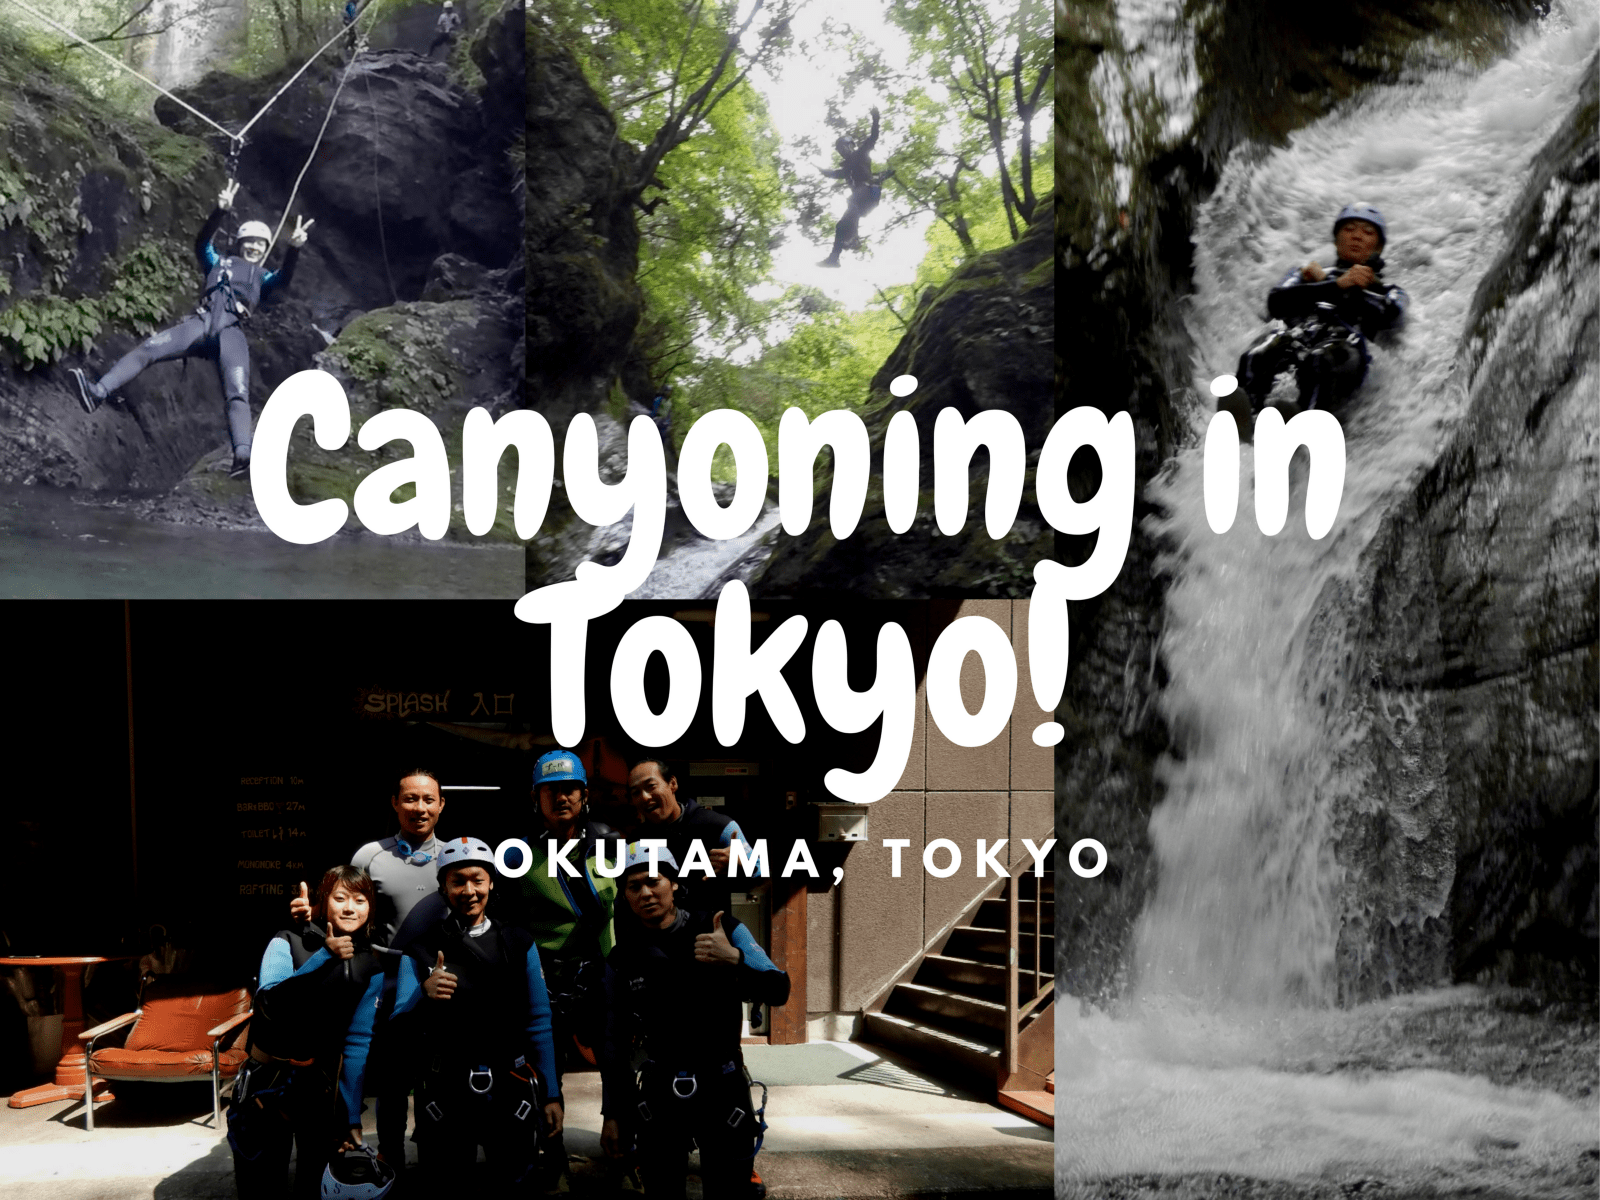 Canyoning in Tokyo: the Wildest Spot in Tama